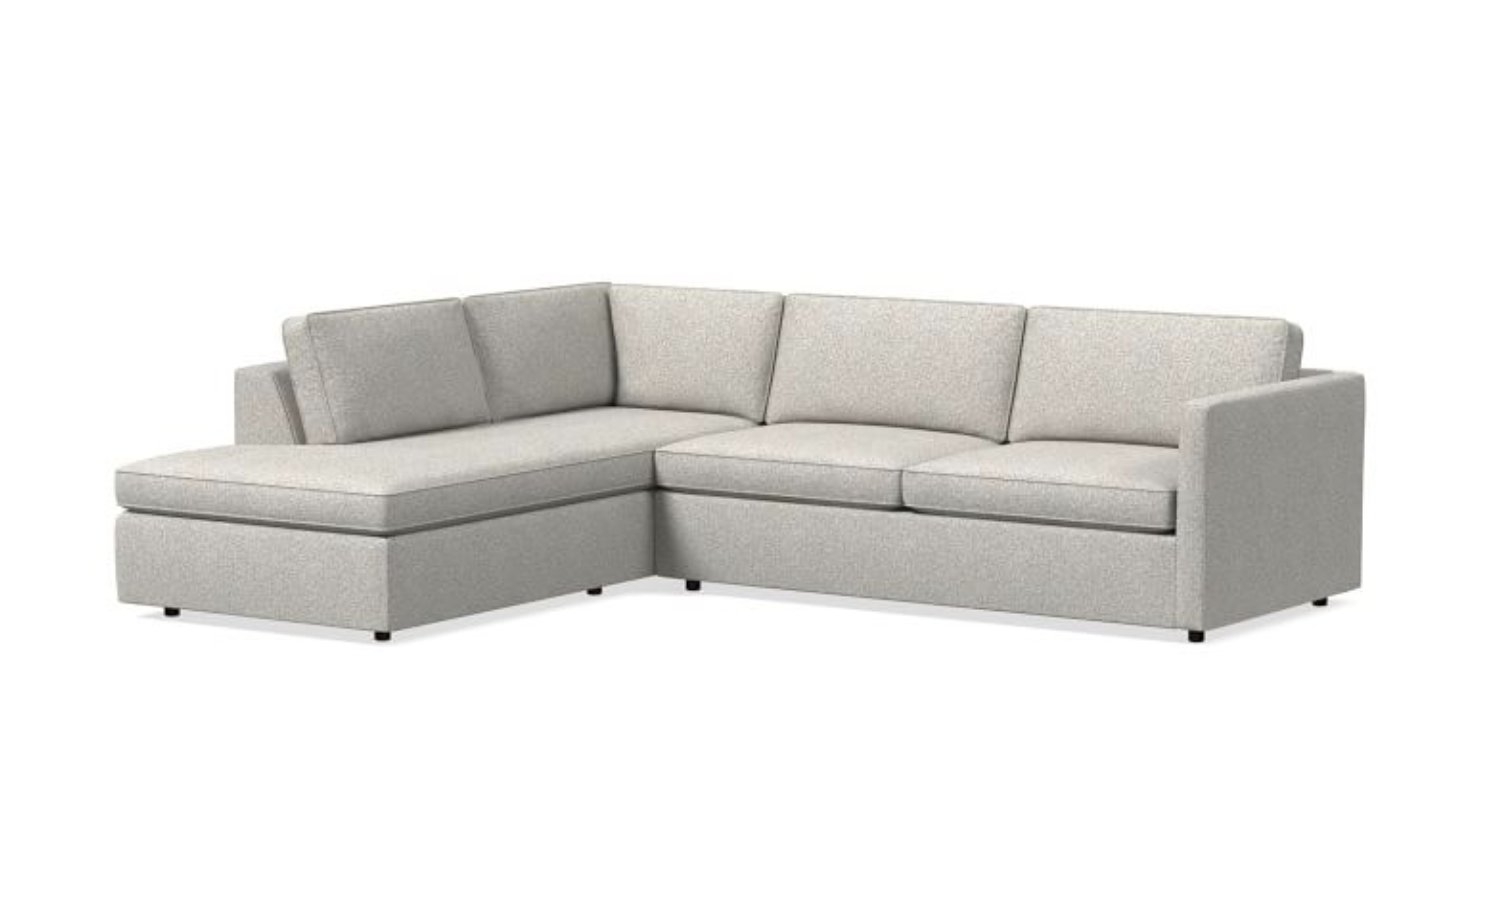 Harris Sectional Set 02: Right Arm Sleeper Sofa, Left Arm Terminal Chaise, Poly, Chenille Tweed, Irongate, - Image 0